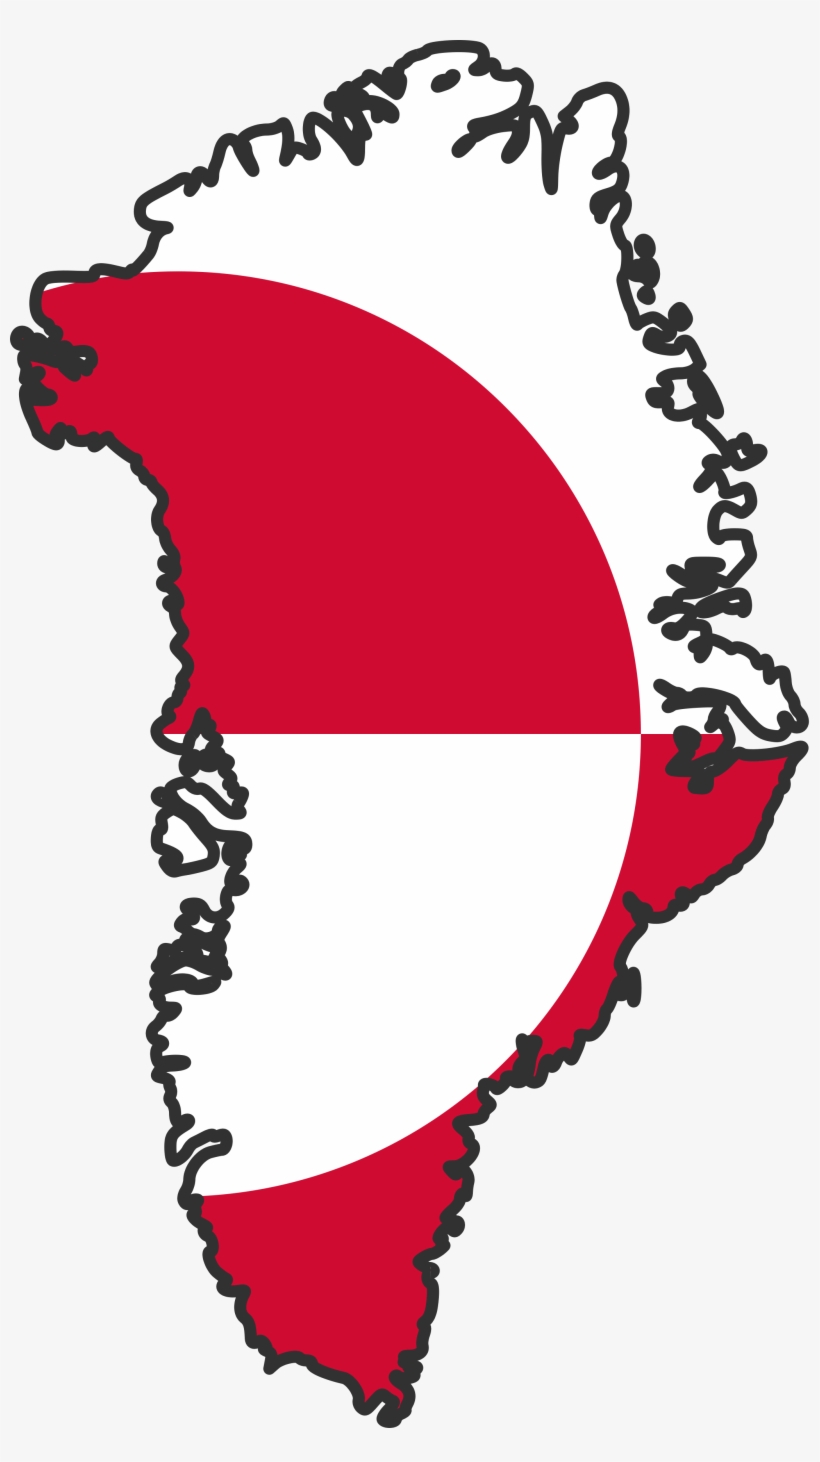 Greenland Flag Map - Greenland Flag And Map, transparent png #3771091